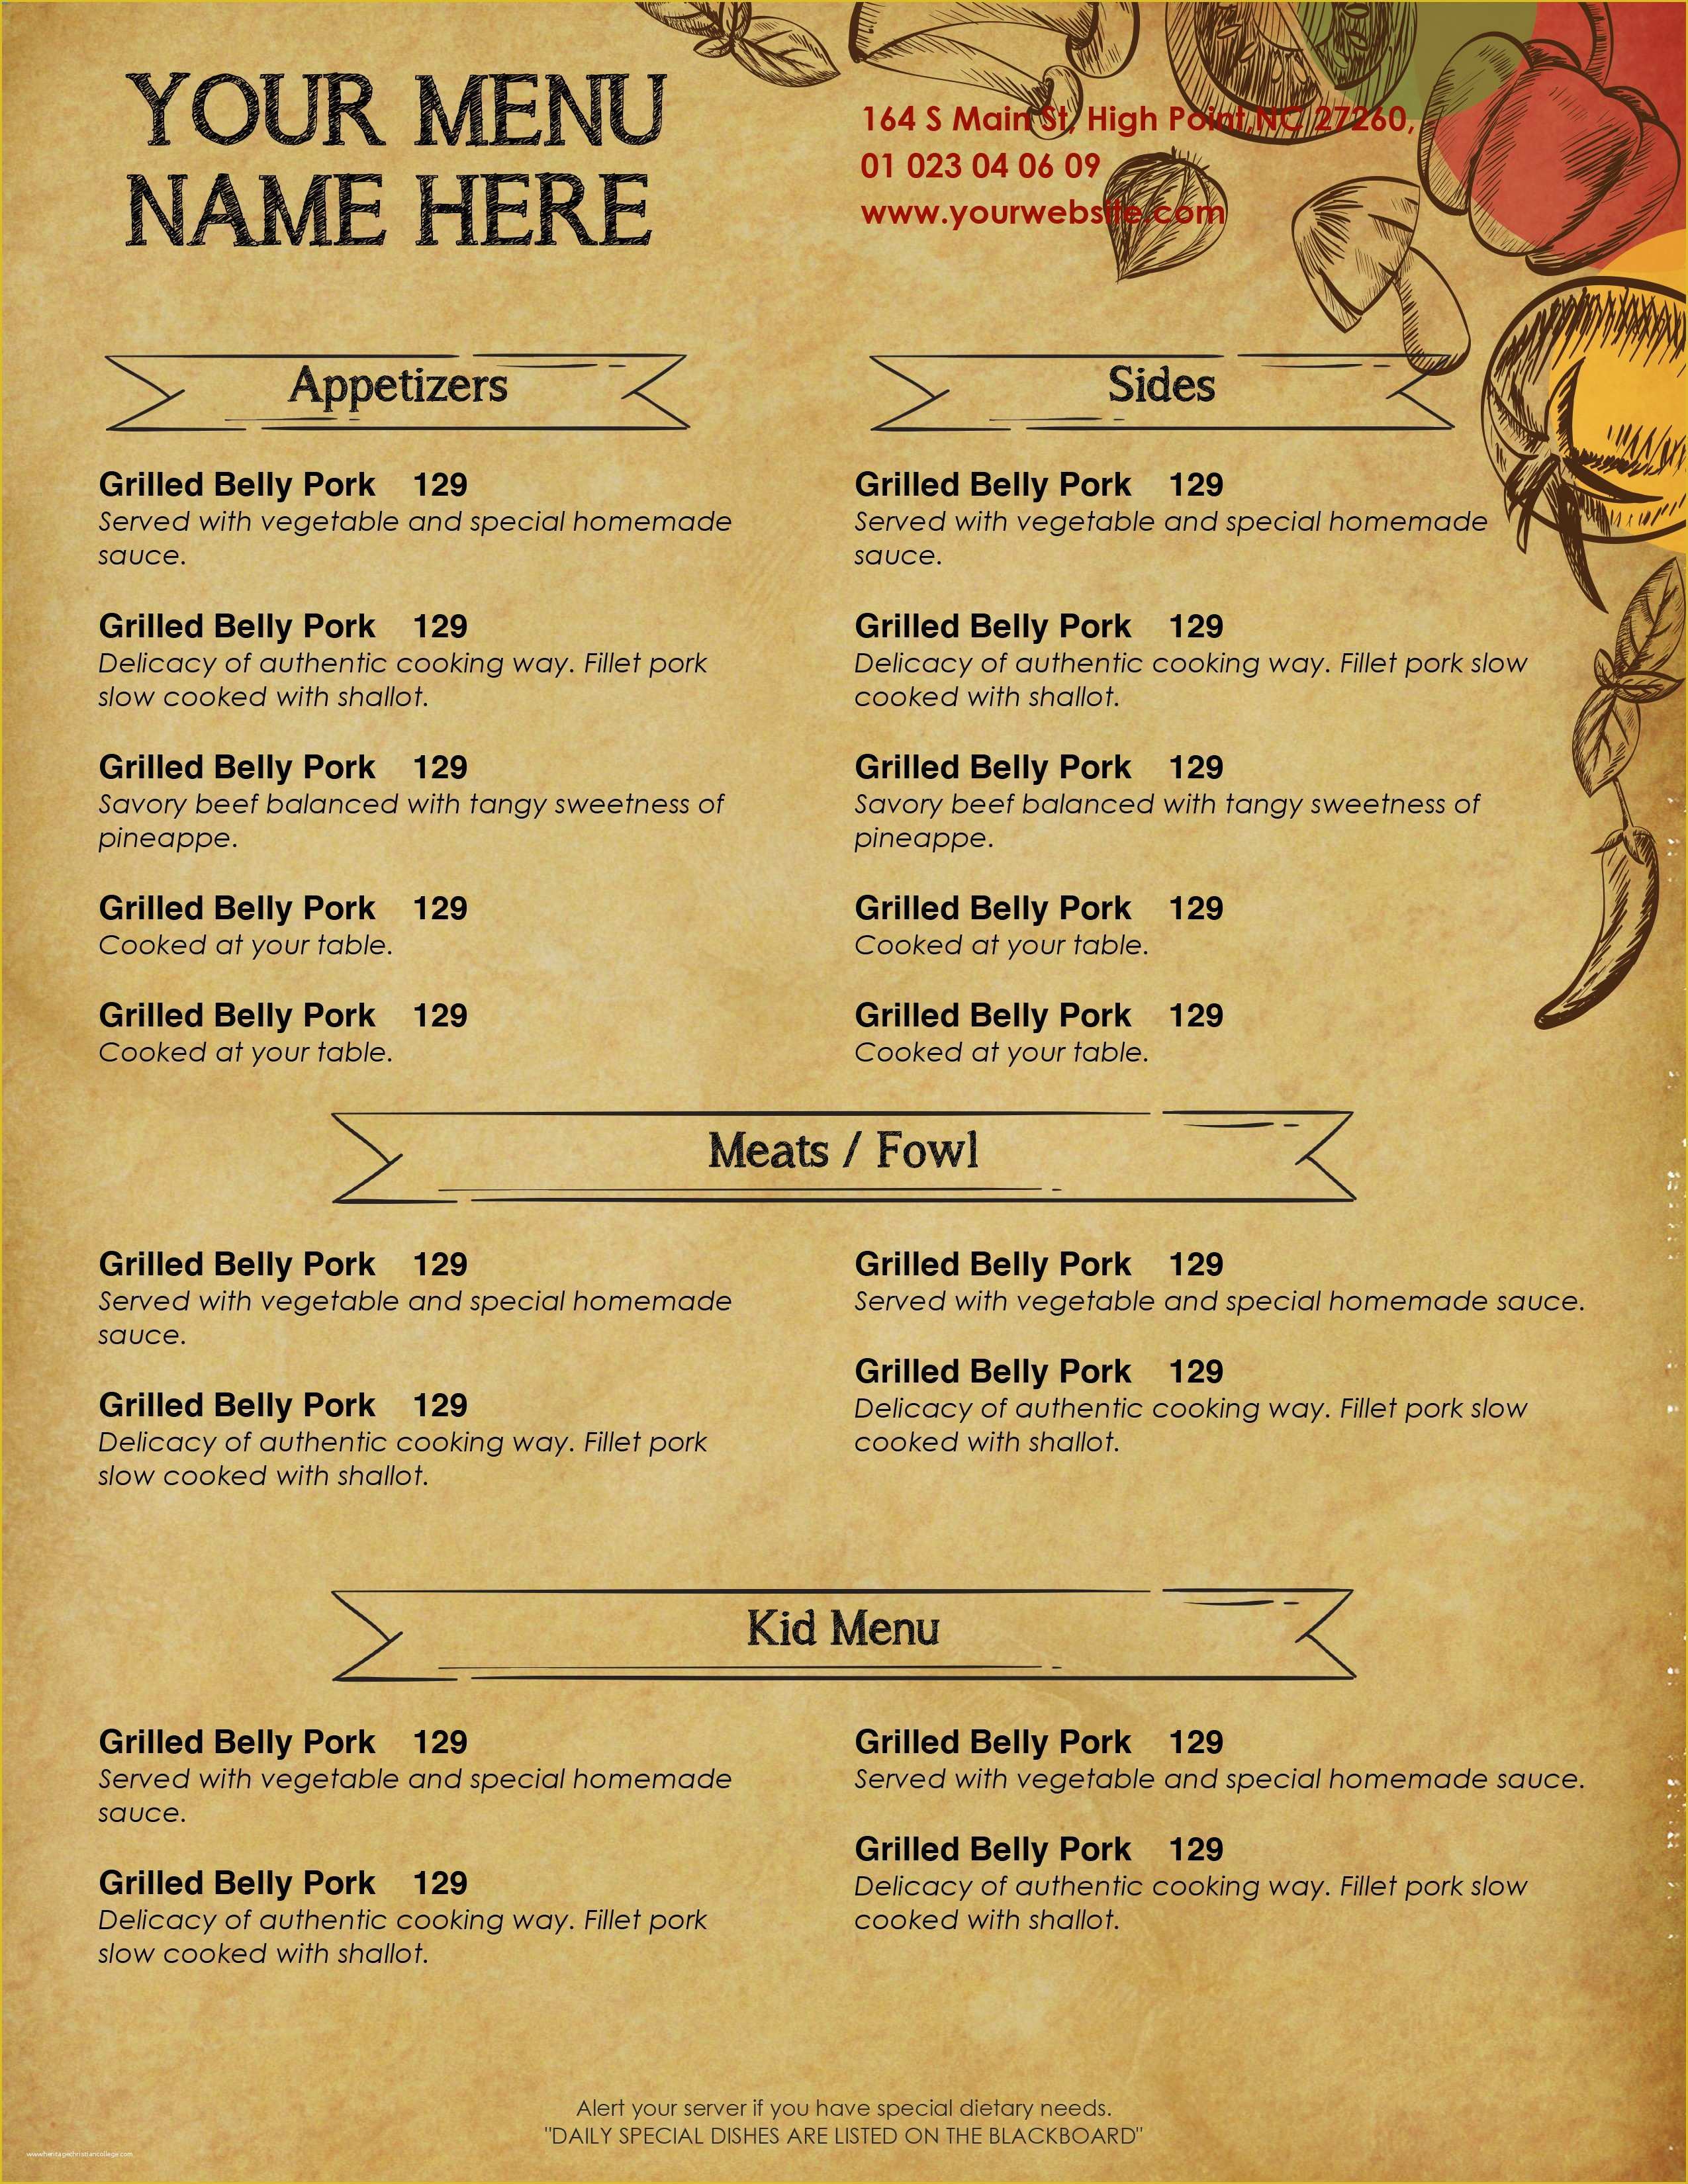 Free Catering Menu Templates For Microsoft Word Of Design Templates Menu Templates Wedding 